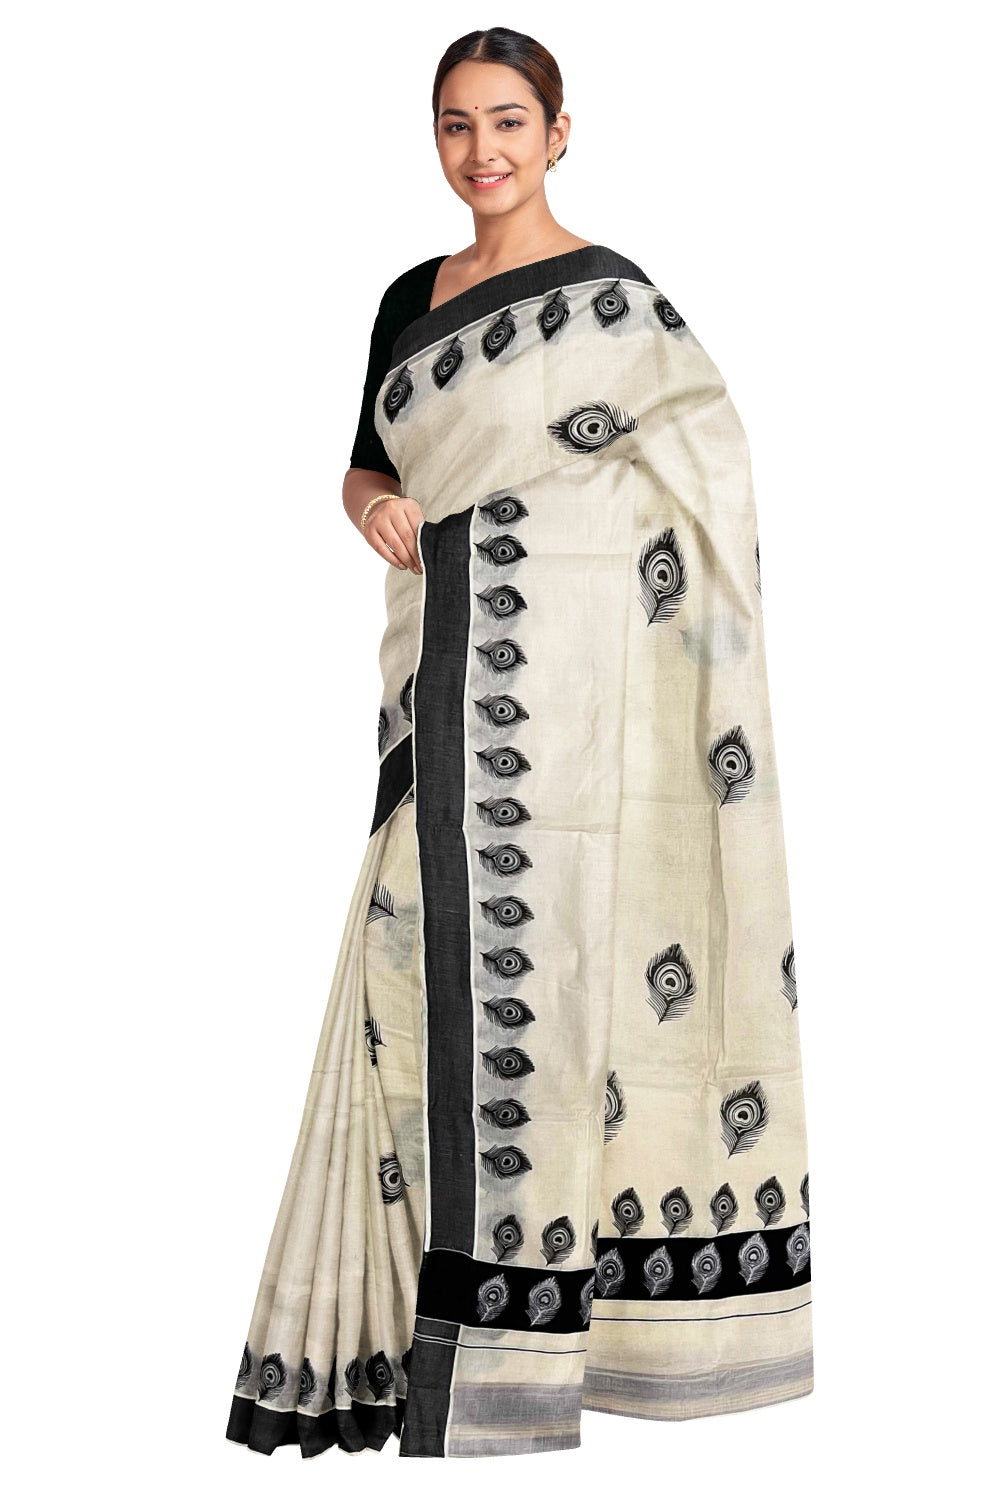 Off White Pure Cotton Kerala Saree with Peacock Feather Block Prints on Black Border and Tassels on Pallu